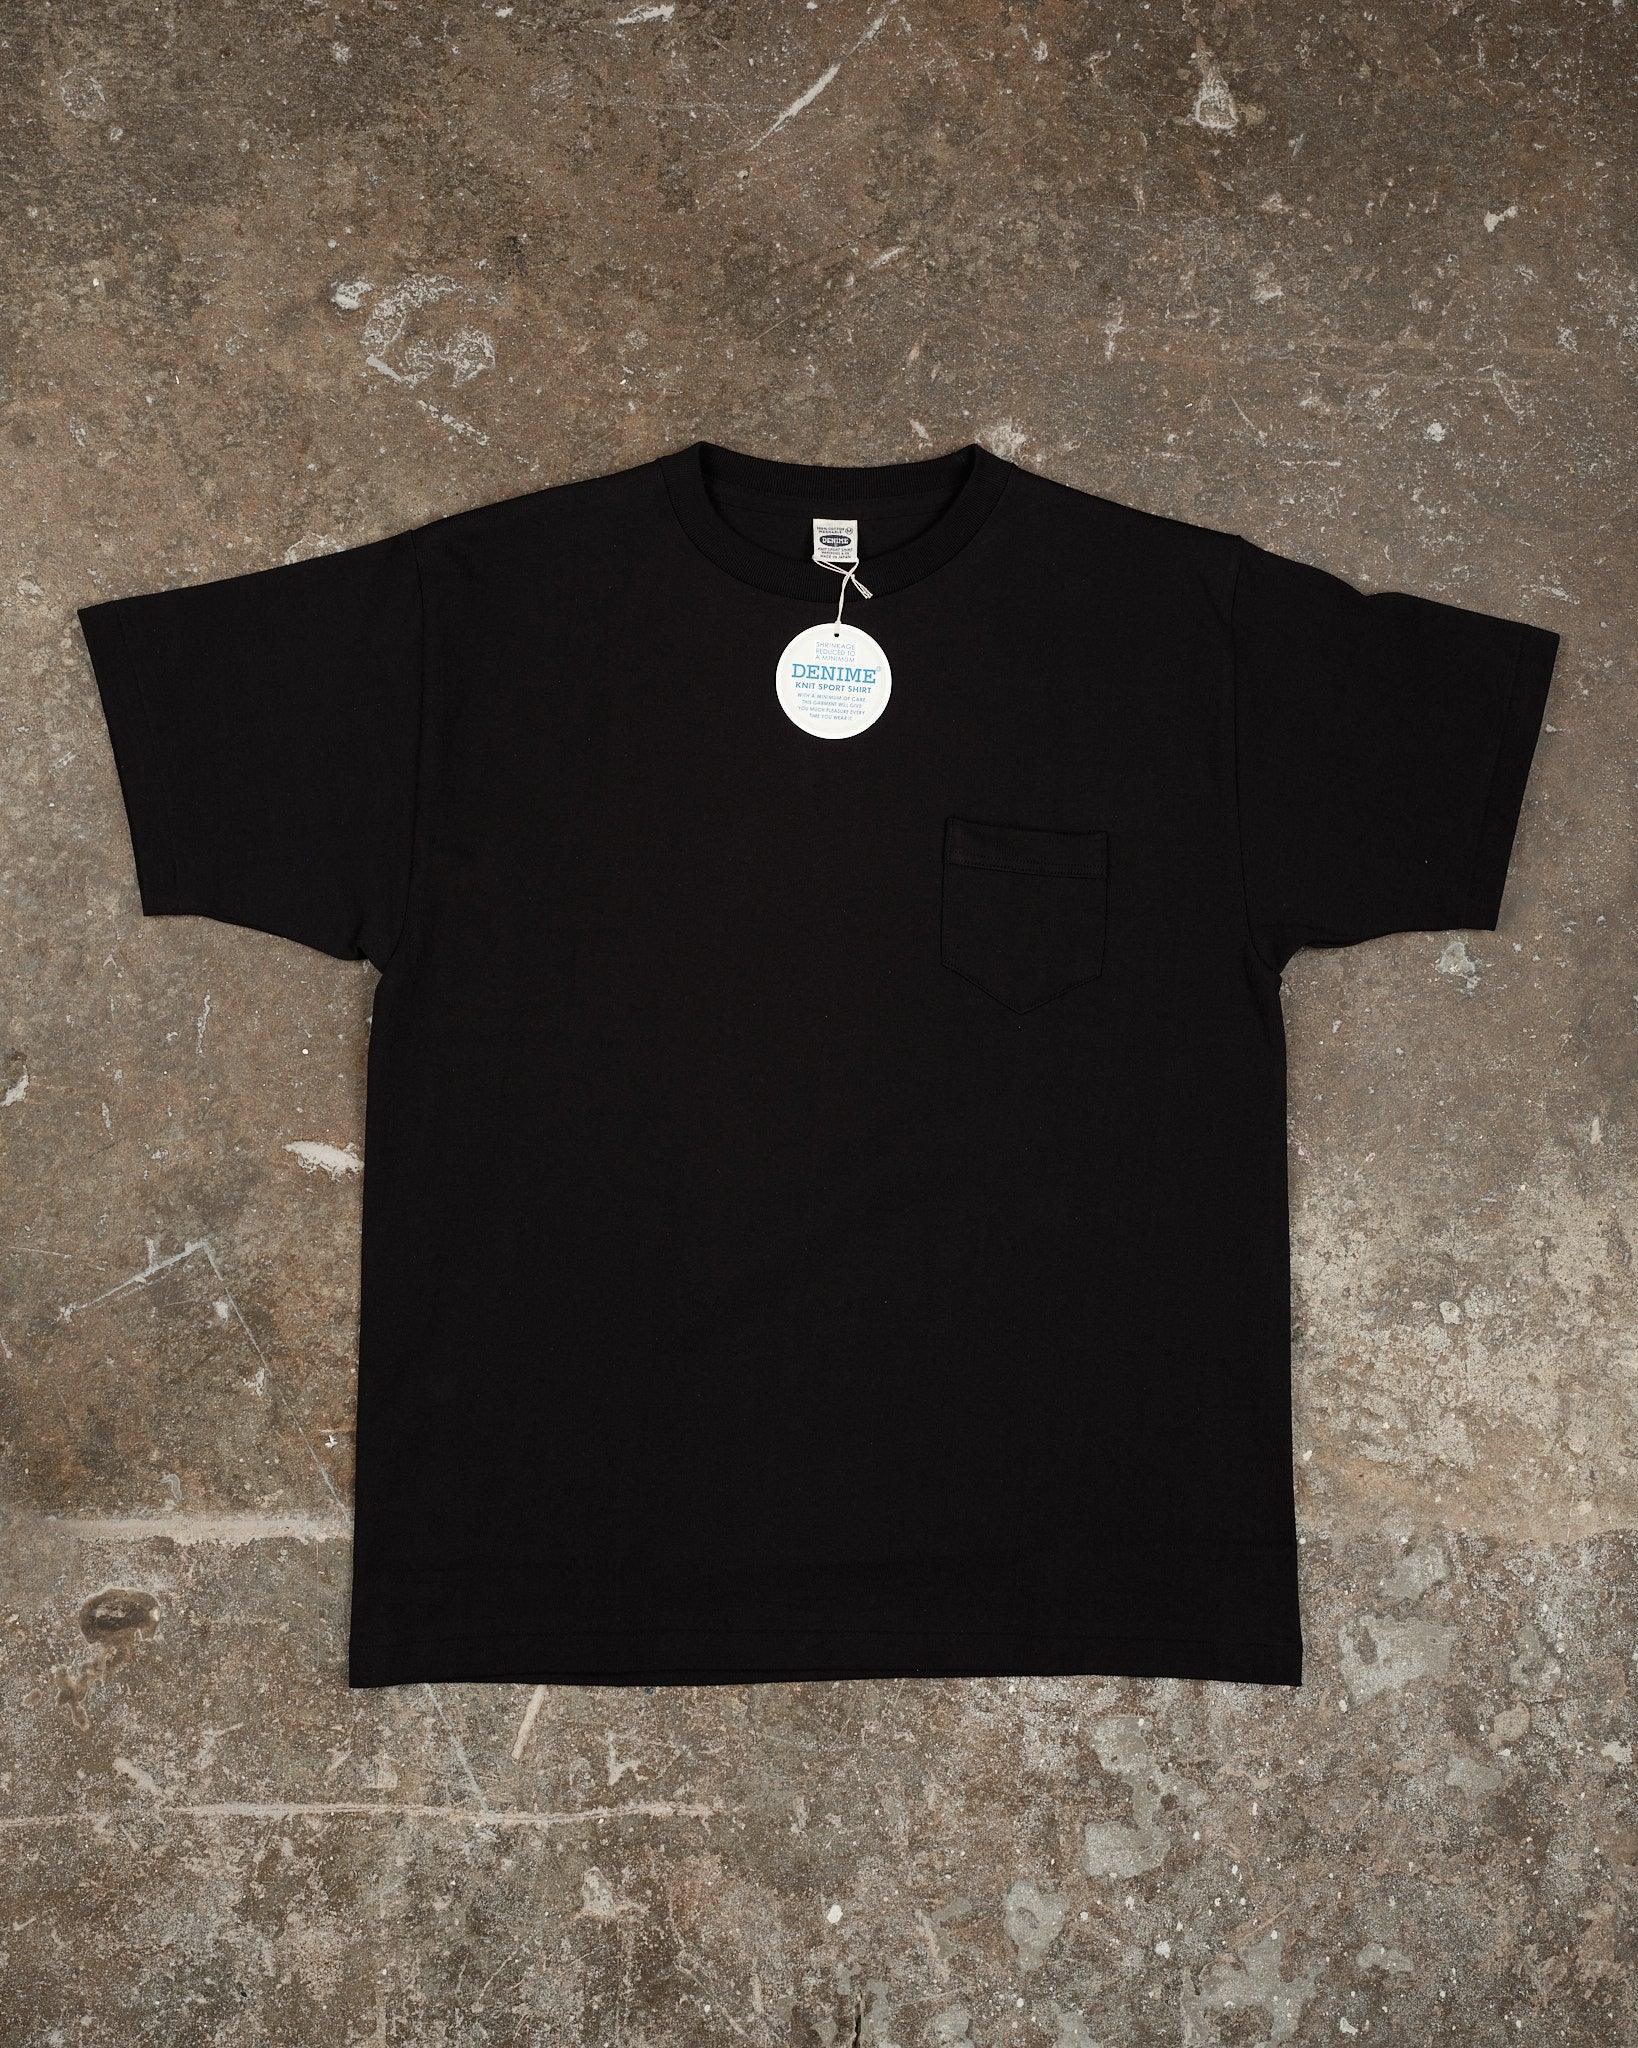 Lot 263 - Pocket Tee - Black - Guilty Party